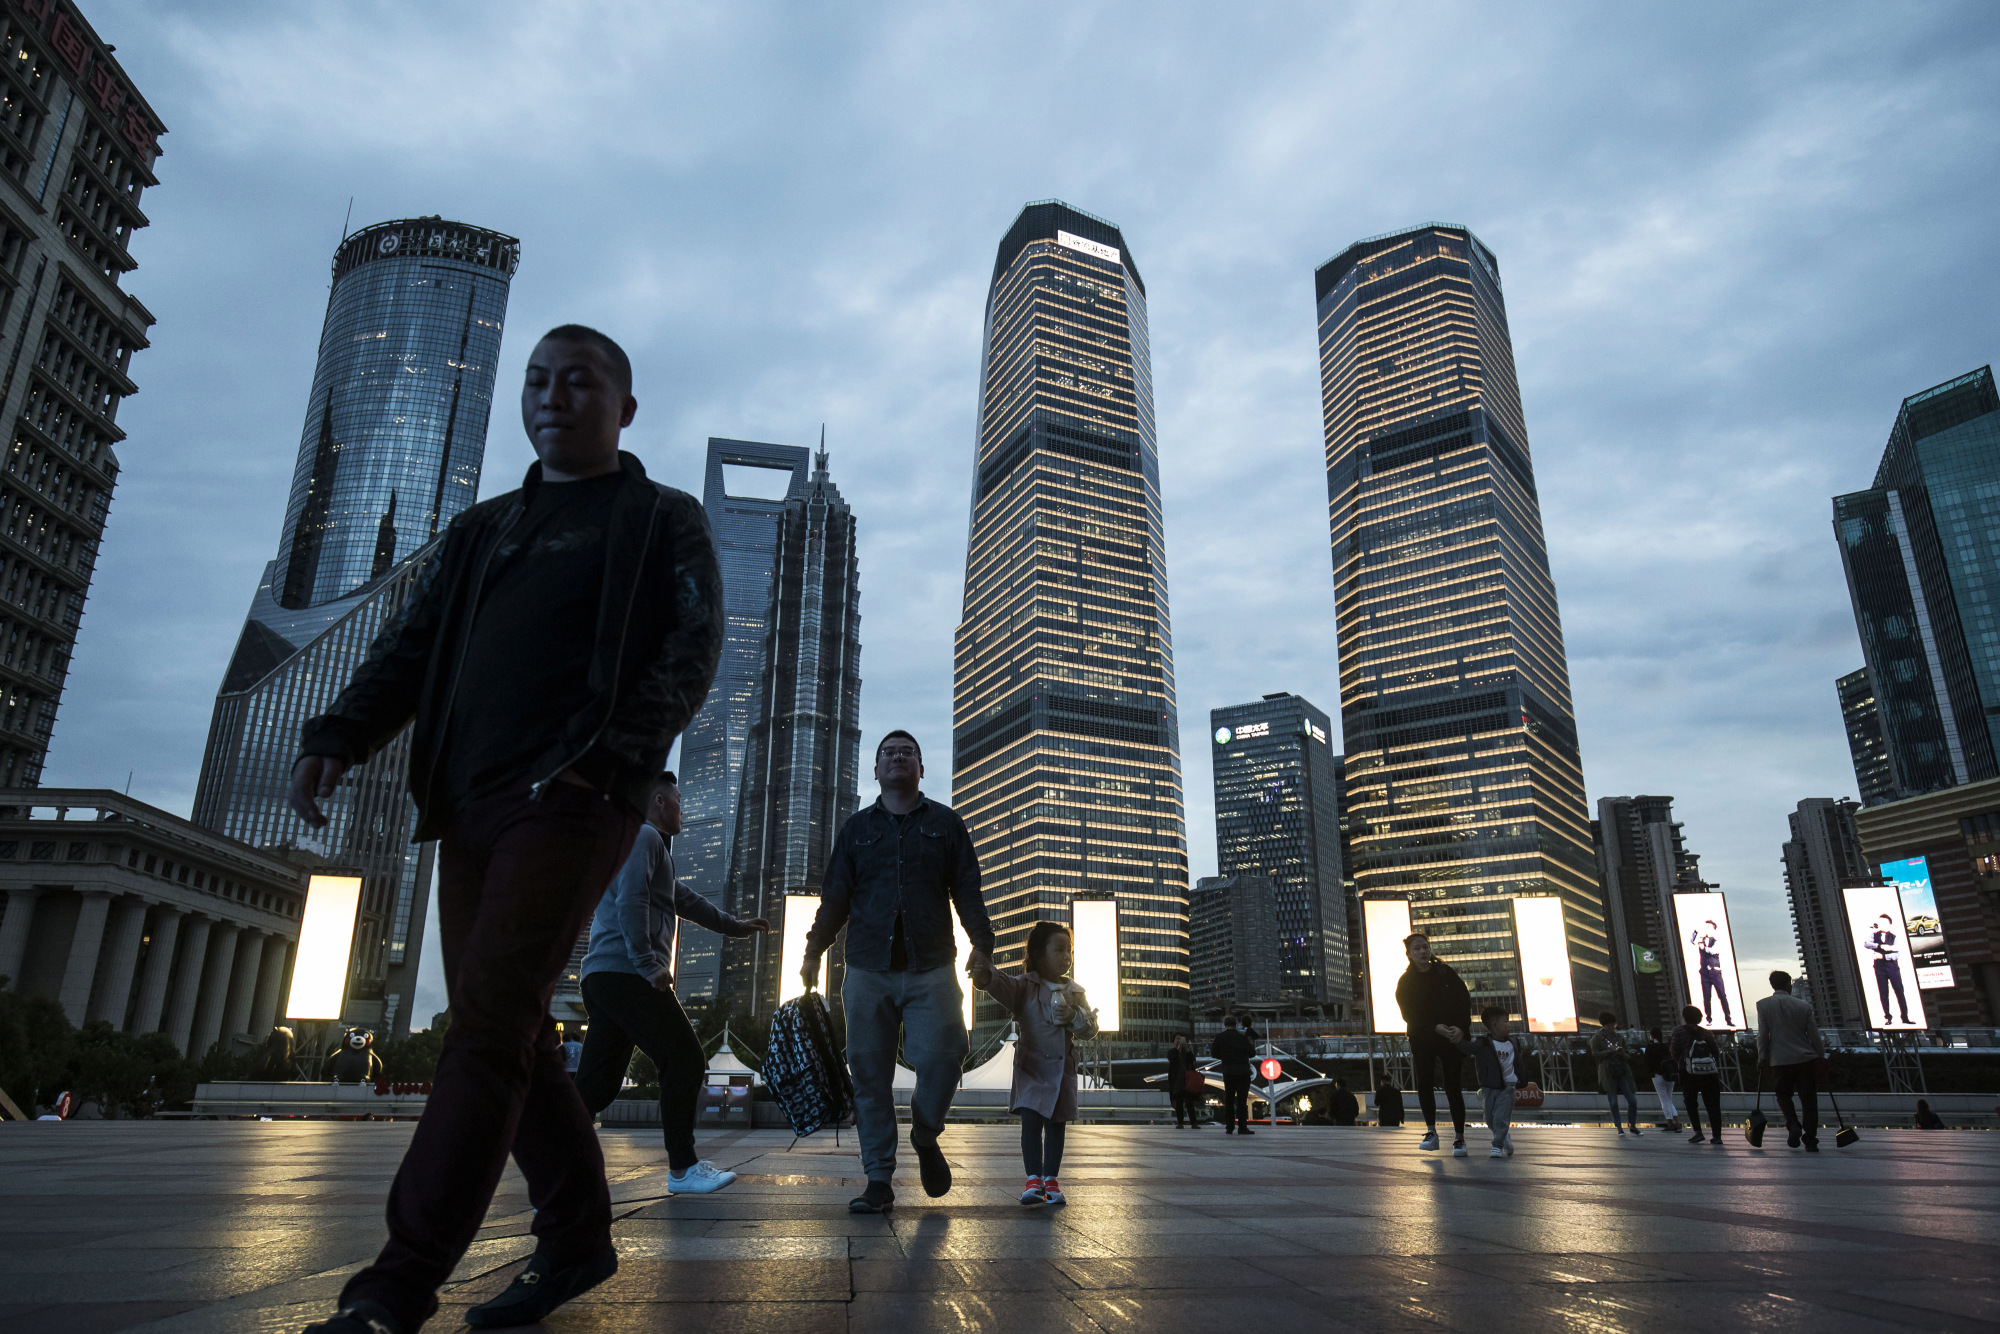 General Views of Shanghai Financial District Ahead of Communist Party Congress